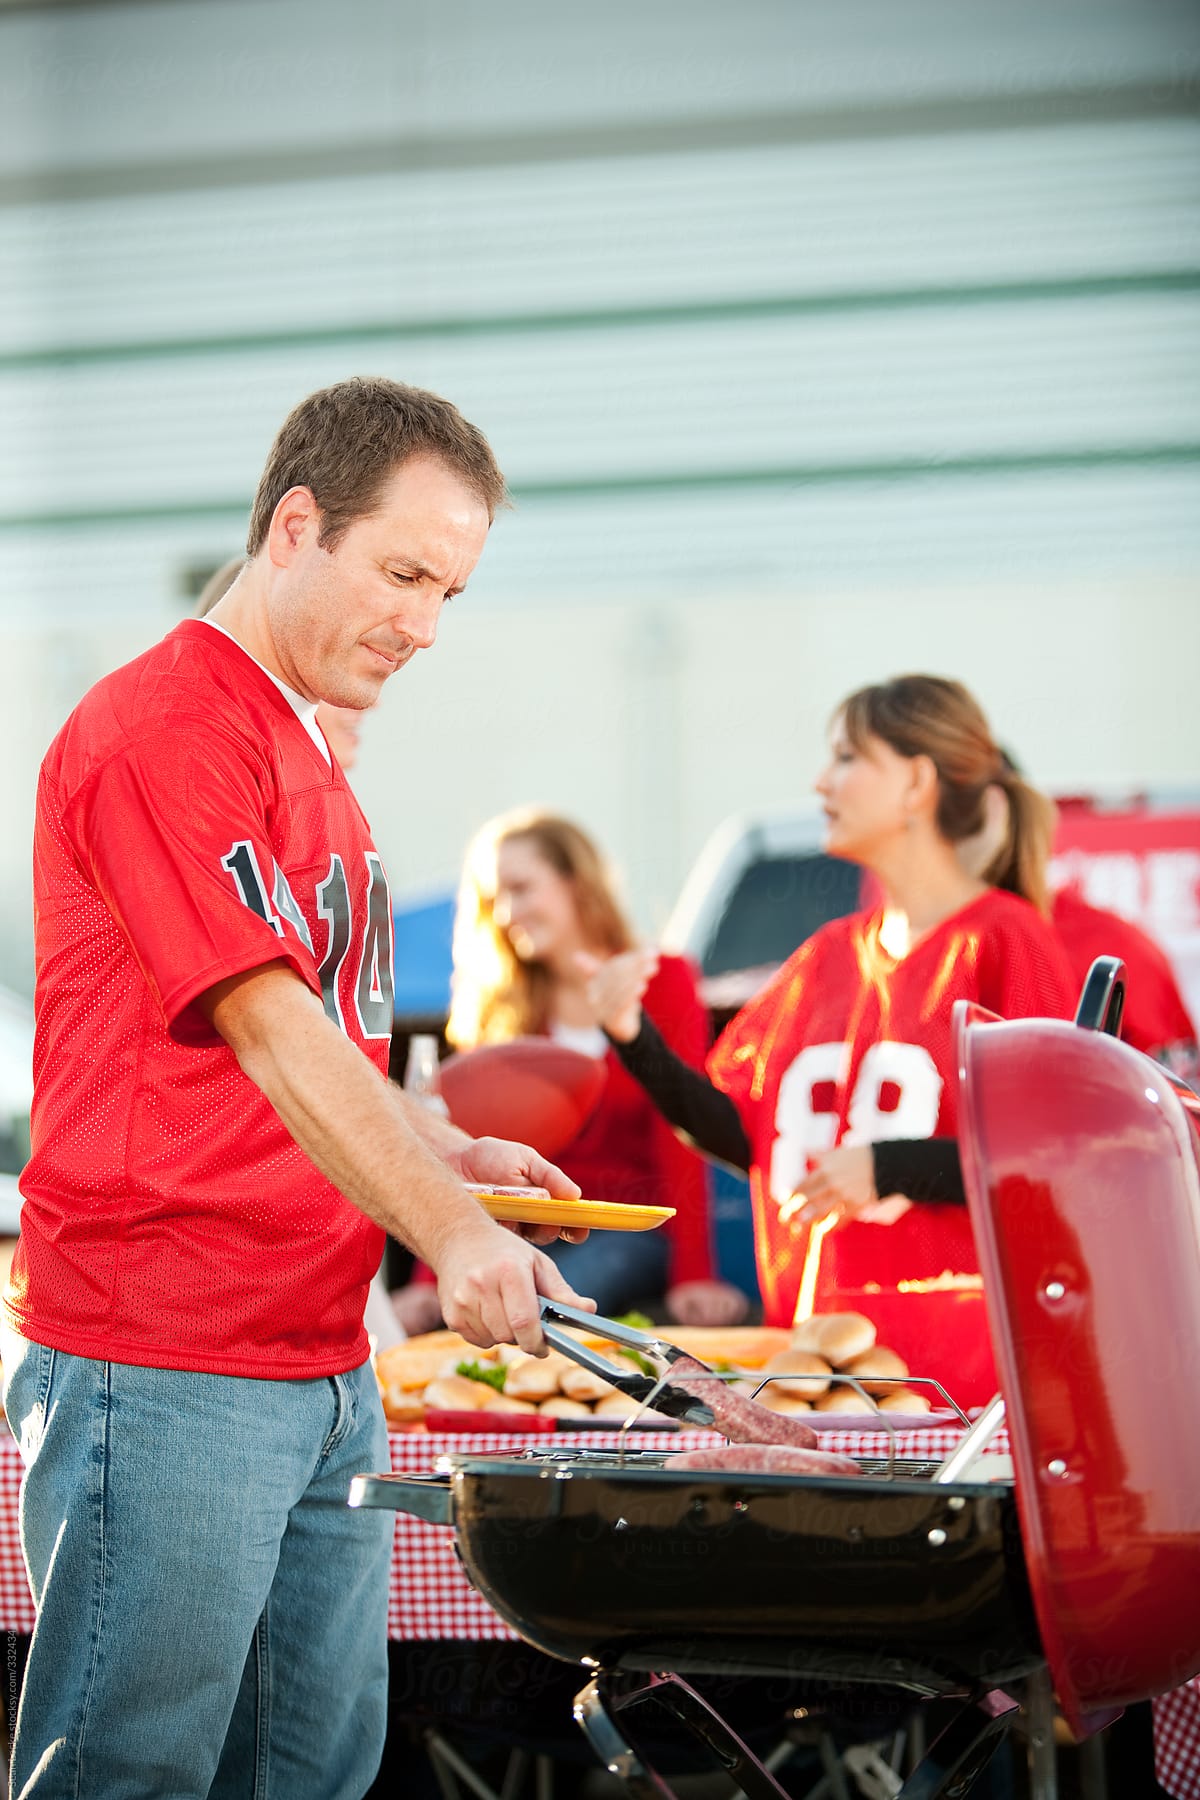 Tailgating: Man At Grill Cooking Sausages